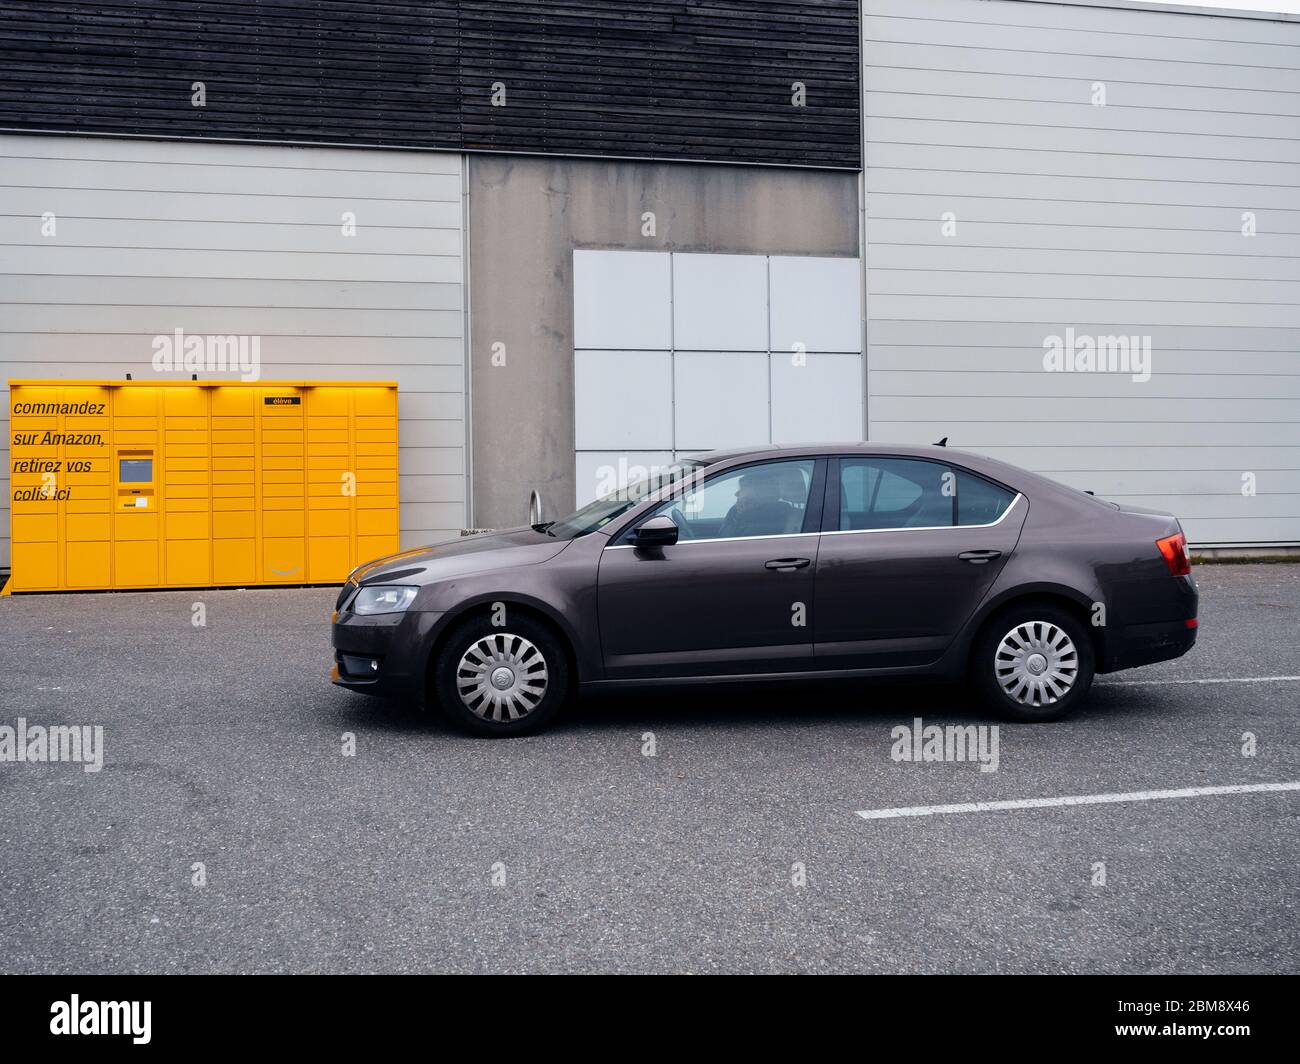 Paris, France - Mar 29, 2020: Side view of new brown Skoda Octavia car in  front of yellow Amazon Locker - self-service package delivery service  offered by online retailer Amazon Stock Photo - Alamy